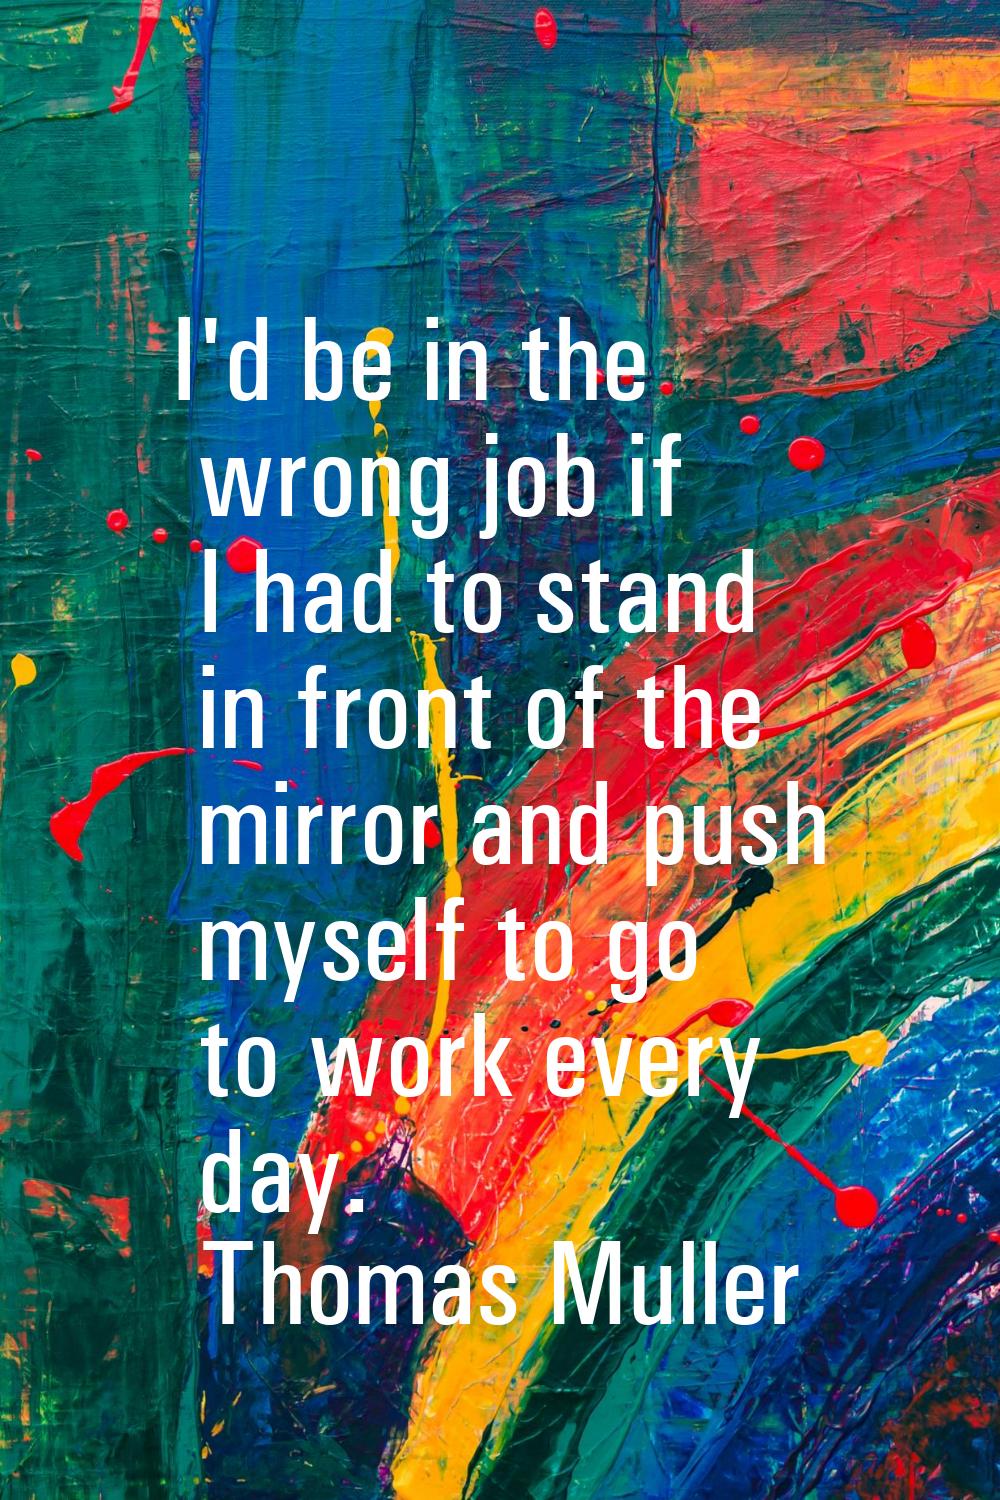 I'd be in the wrong job if I had to stand in front of the mirror and push myself to go to work ever